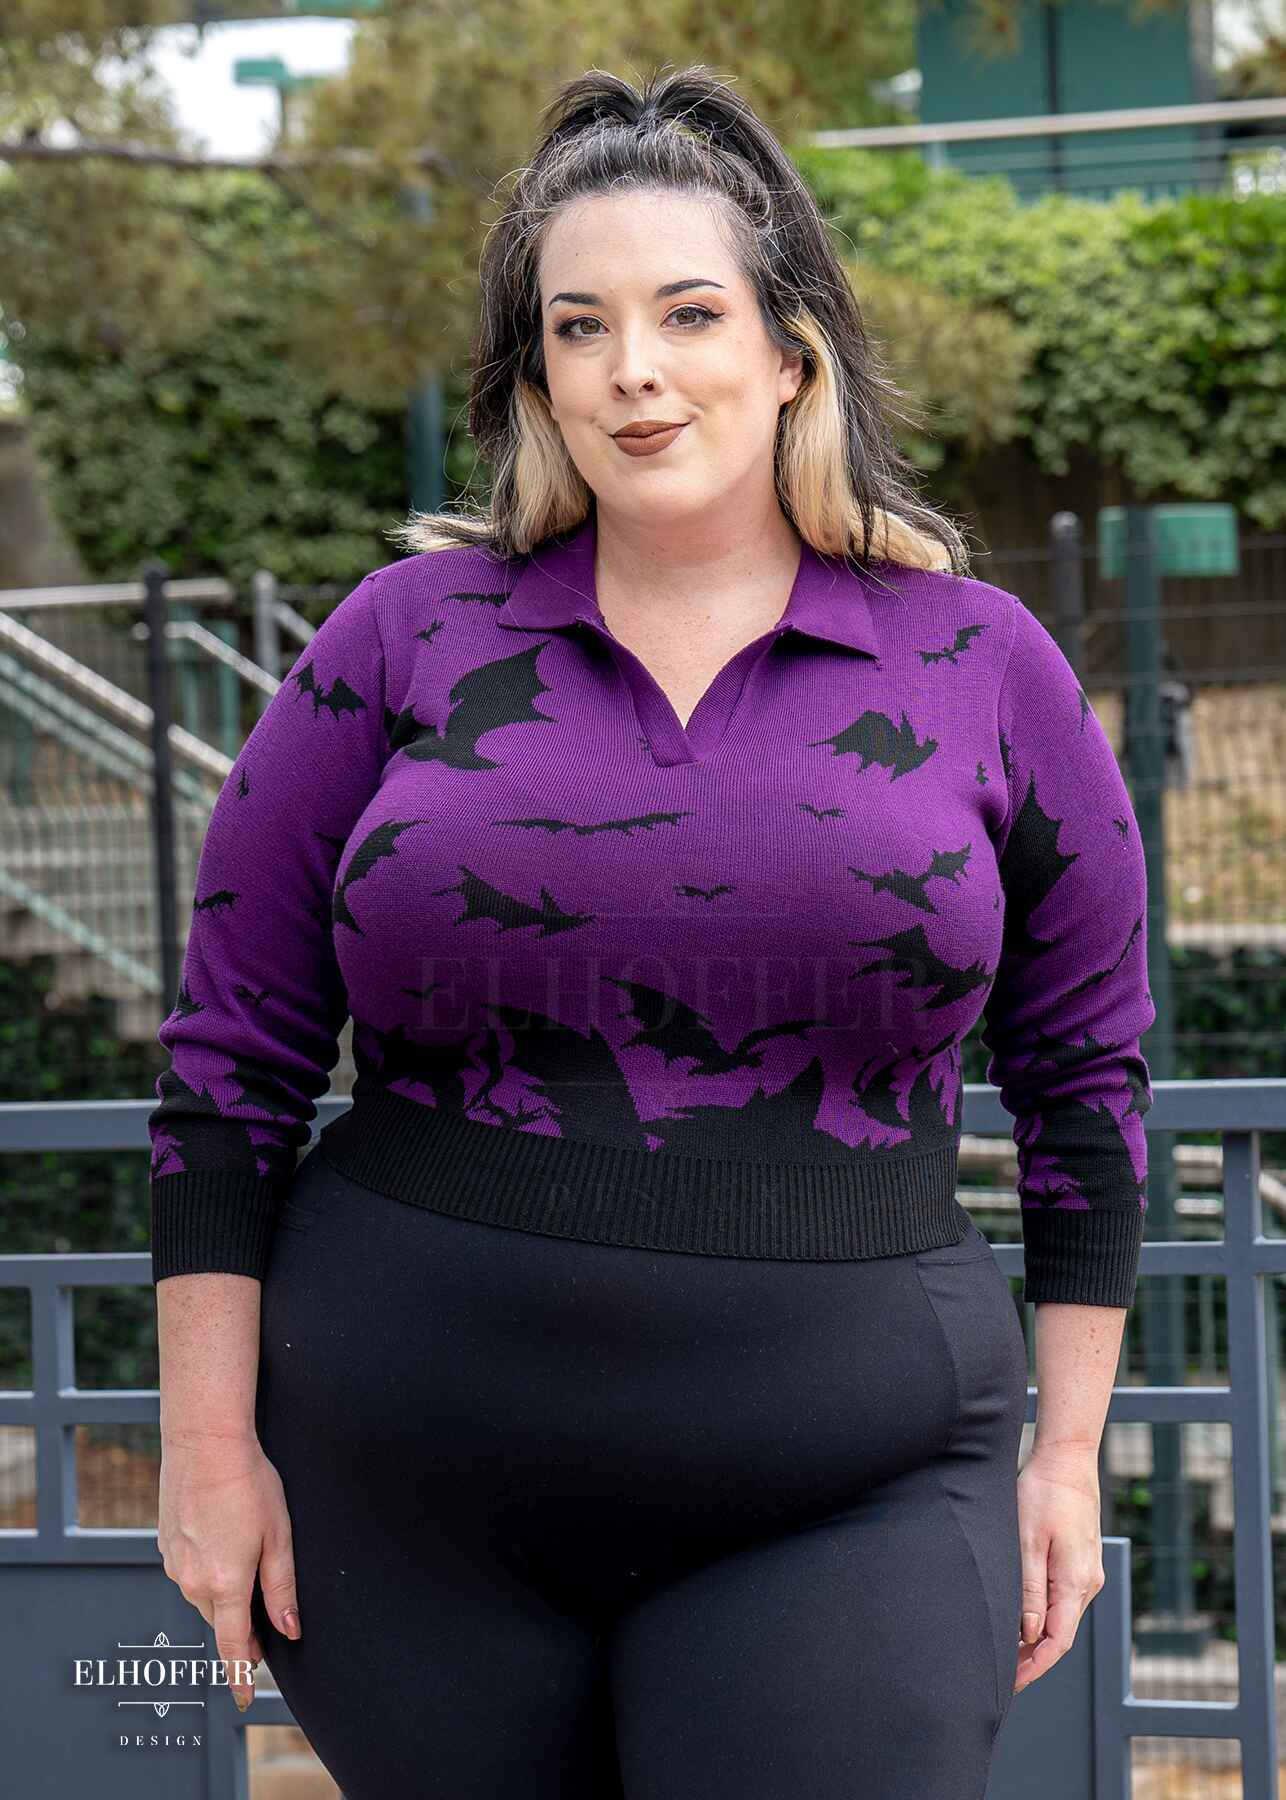 Katie Lynn, a fair skinned 2xl model with shoulder length black and white hair, is wearing the XL sample of a fitted purple cropped 3/4 sleeve knit top with black flying bat design, an open v neck, and collar paired with black leggings. She would normally wear a 2XL for a slightly looser fit.